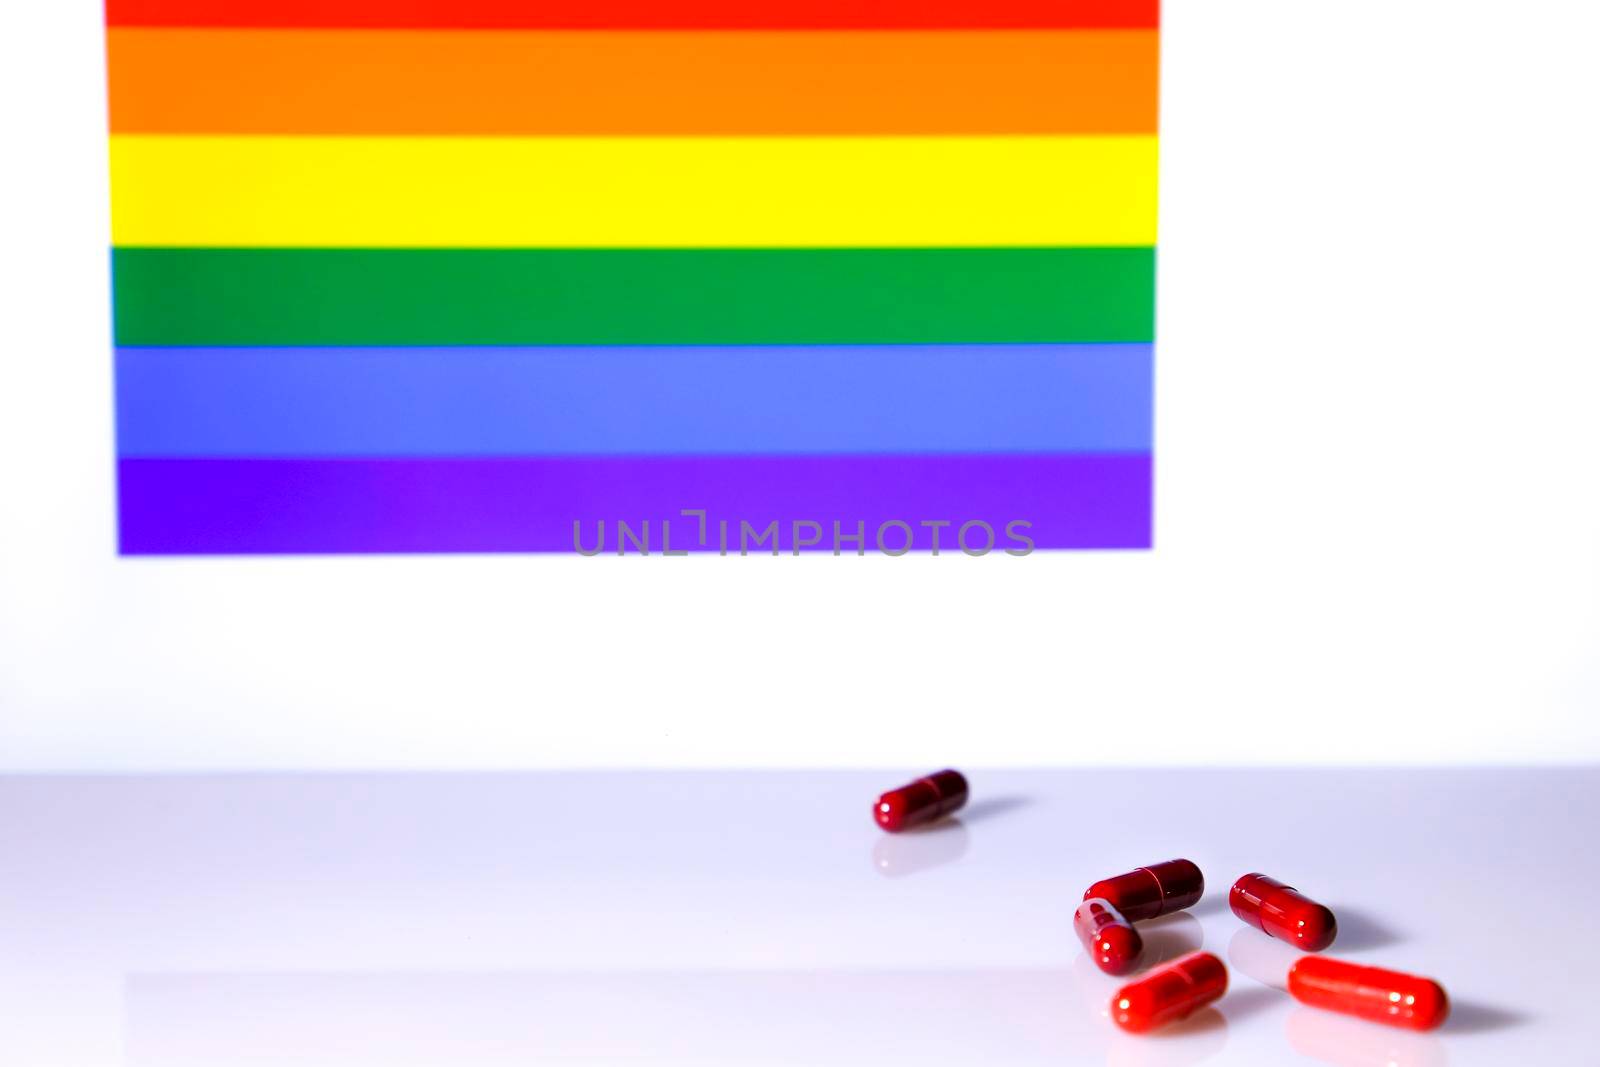 Red capsules and rainbow flag in the background by soniabonet